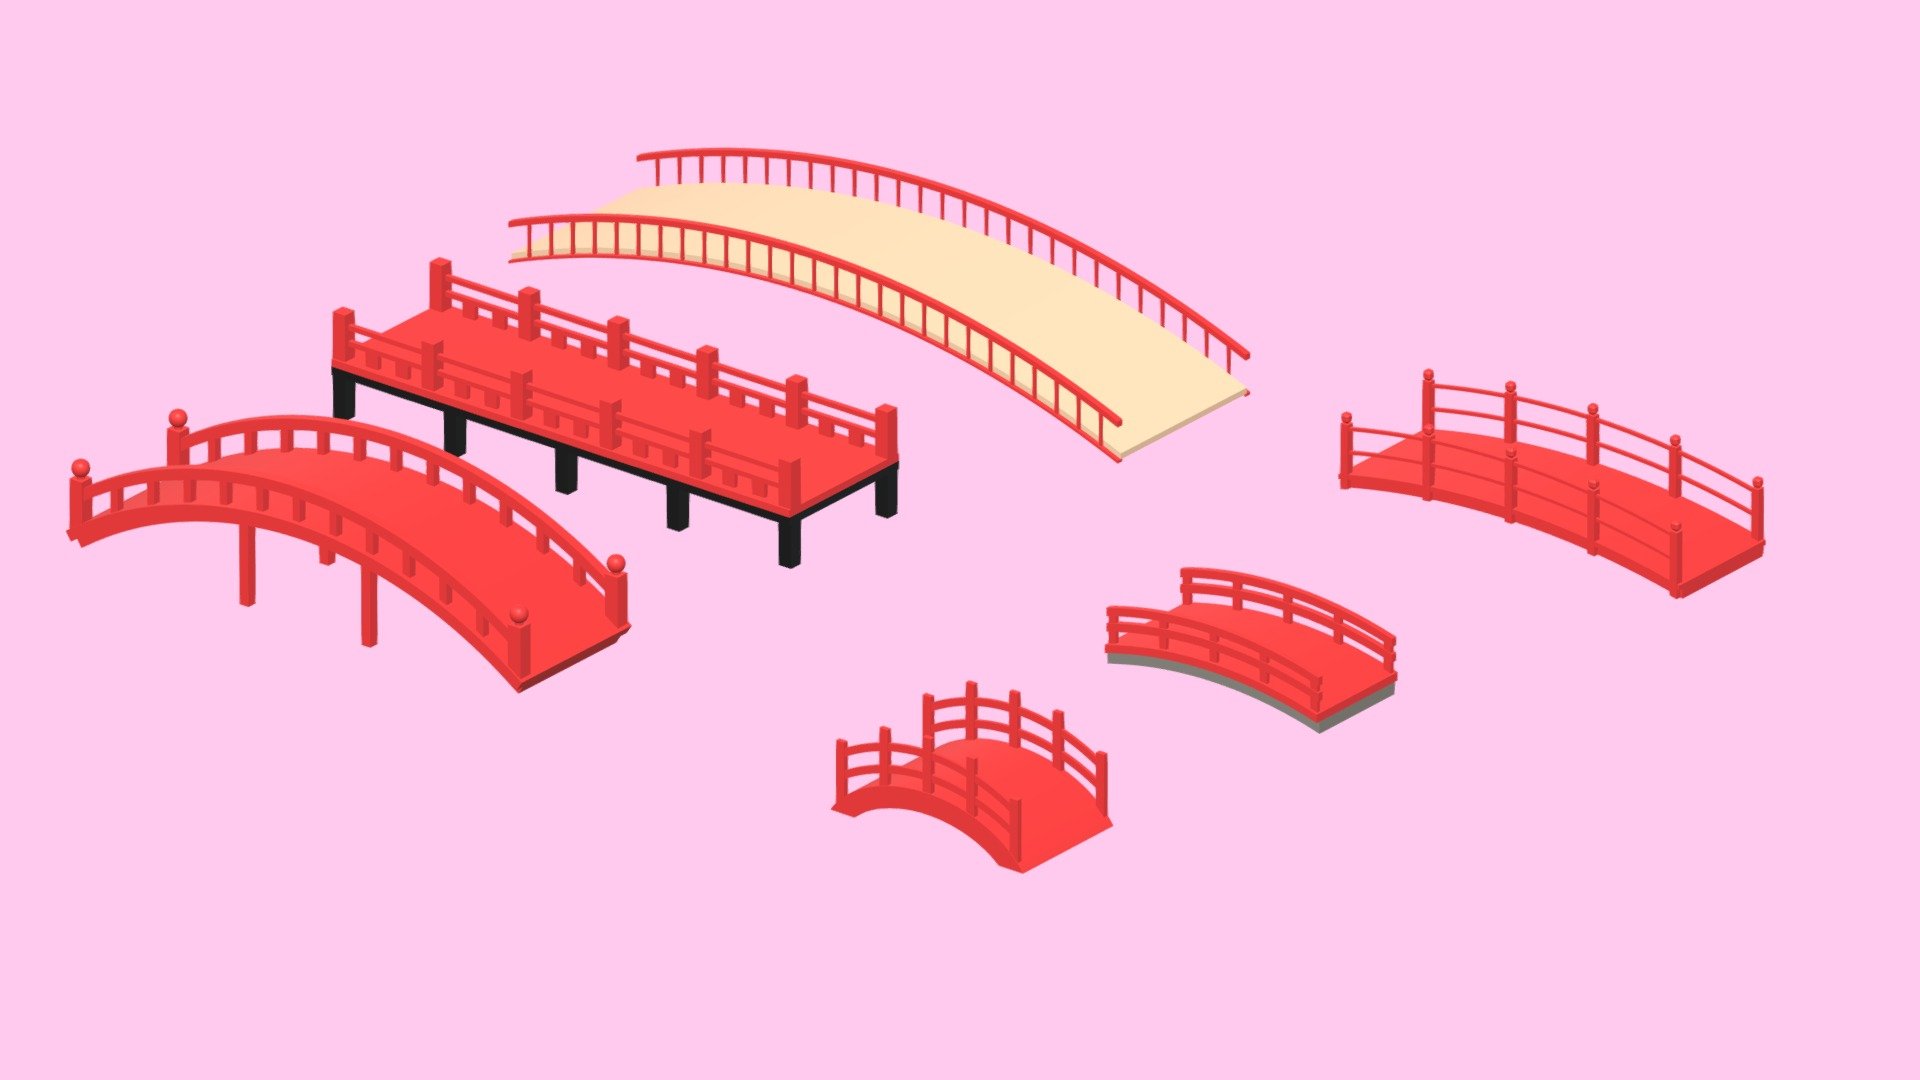 -Cartoon Asian Japanese Bridge Collection

-This product contains 6 objects.

-Total vert: 9,194, poly: 8,871.

-Materials, objects have the correct names.

-Real world scale.

-This product was created in Blender 2.8.

-Formats: blend, fbx, obj, c4d, dae, abc, stl, glb, unity.

-We hope you enjoy this model.

-Thank you 3d model